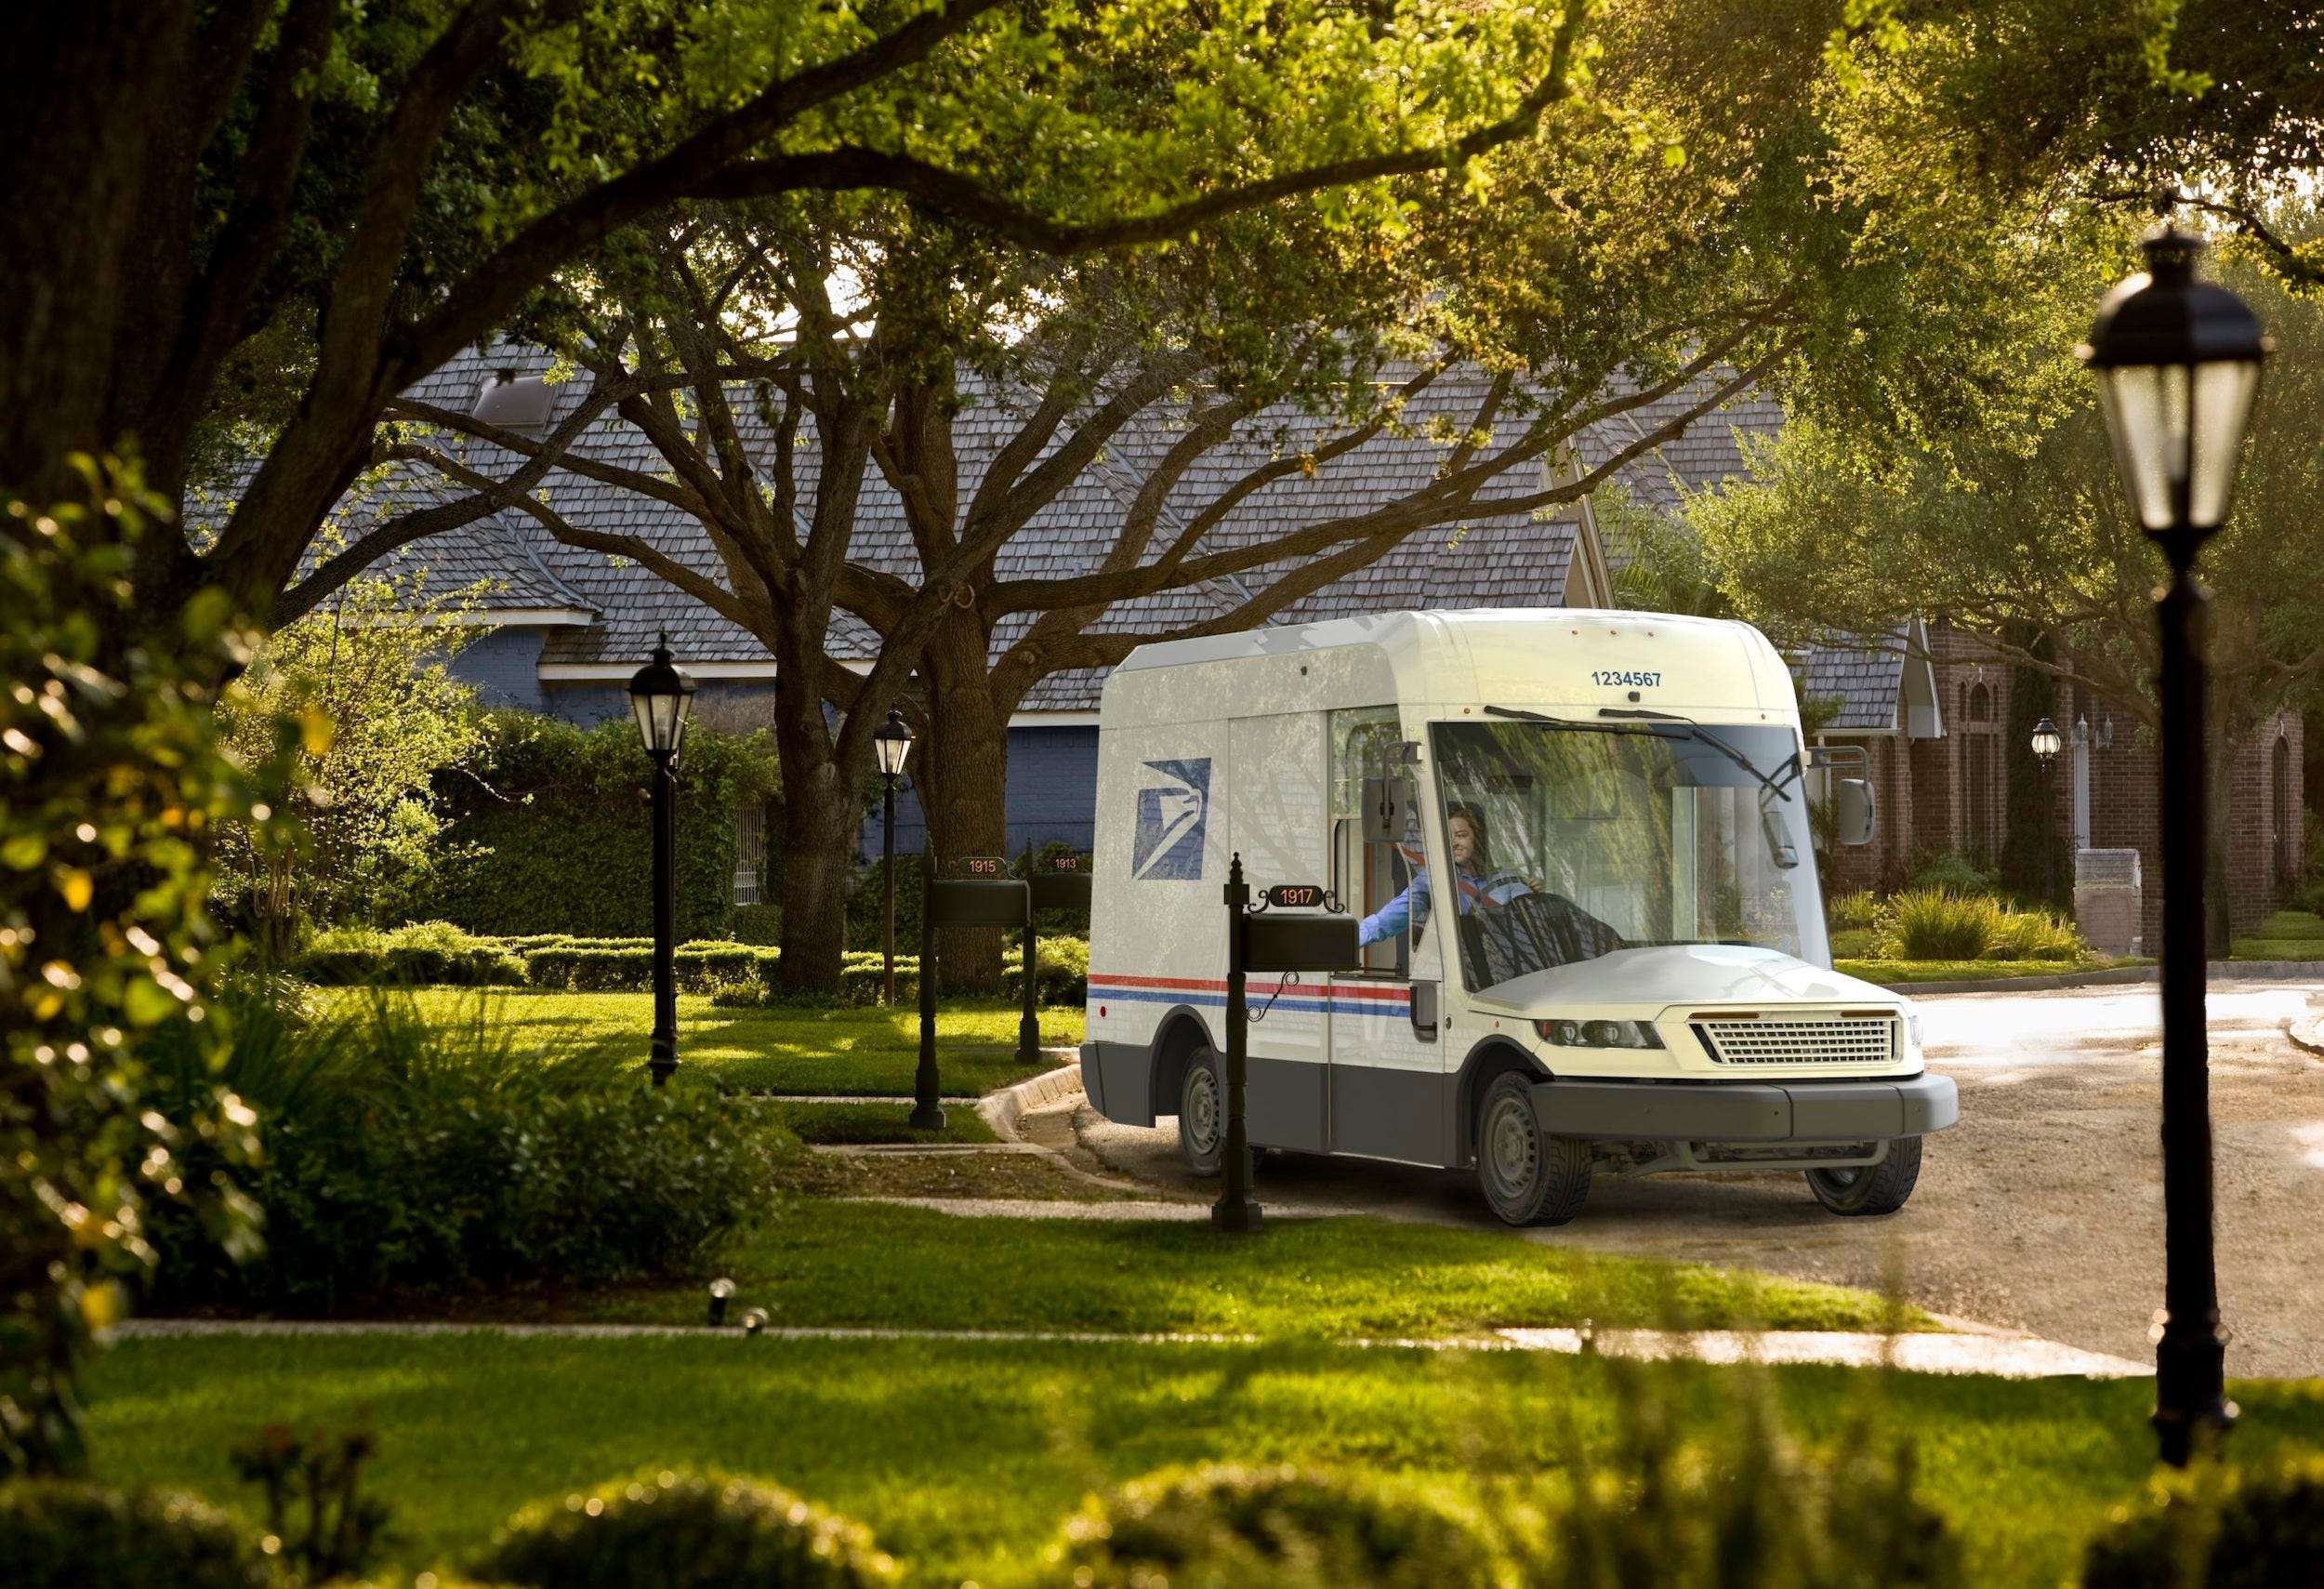 The US Postal Service revealed its first new mail truck in over 30